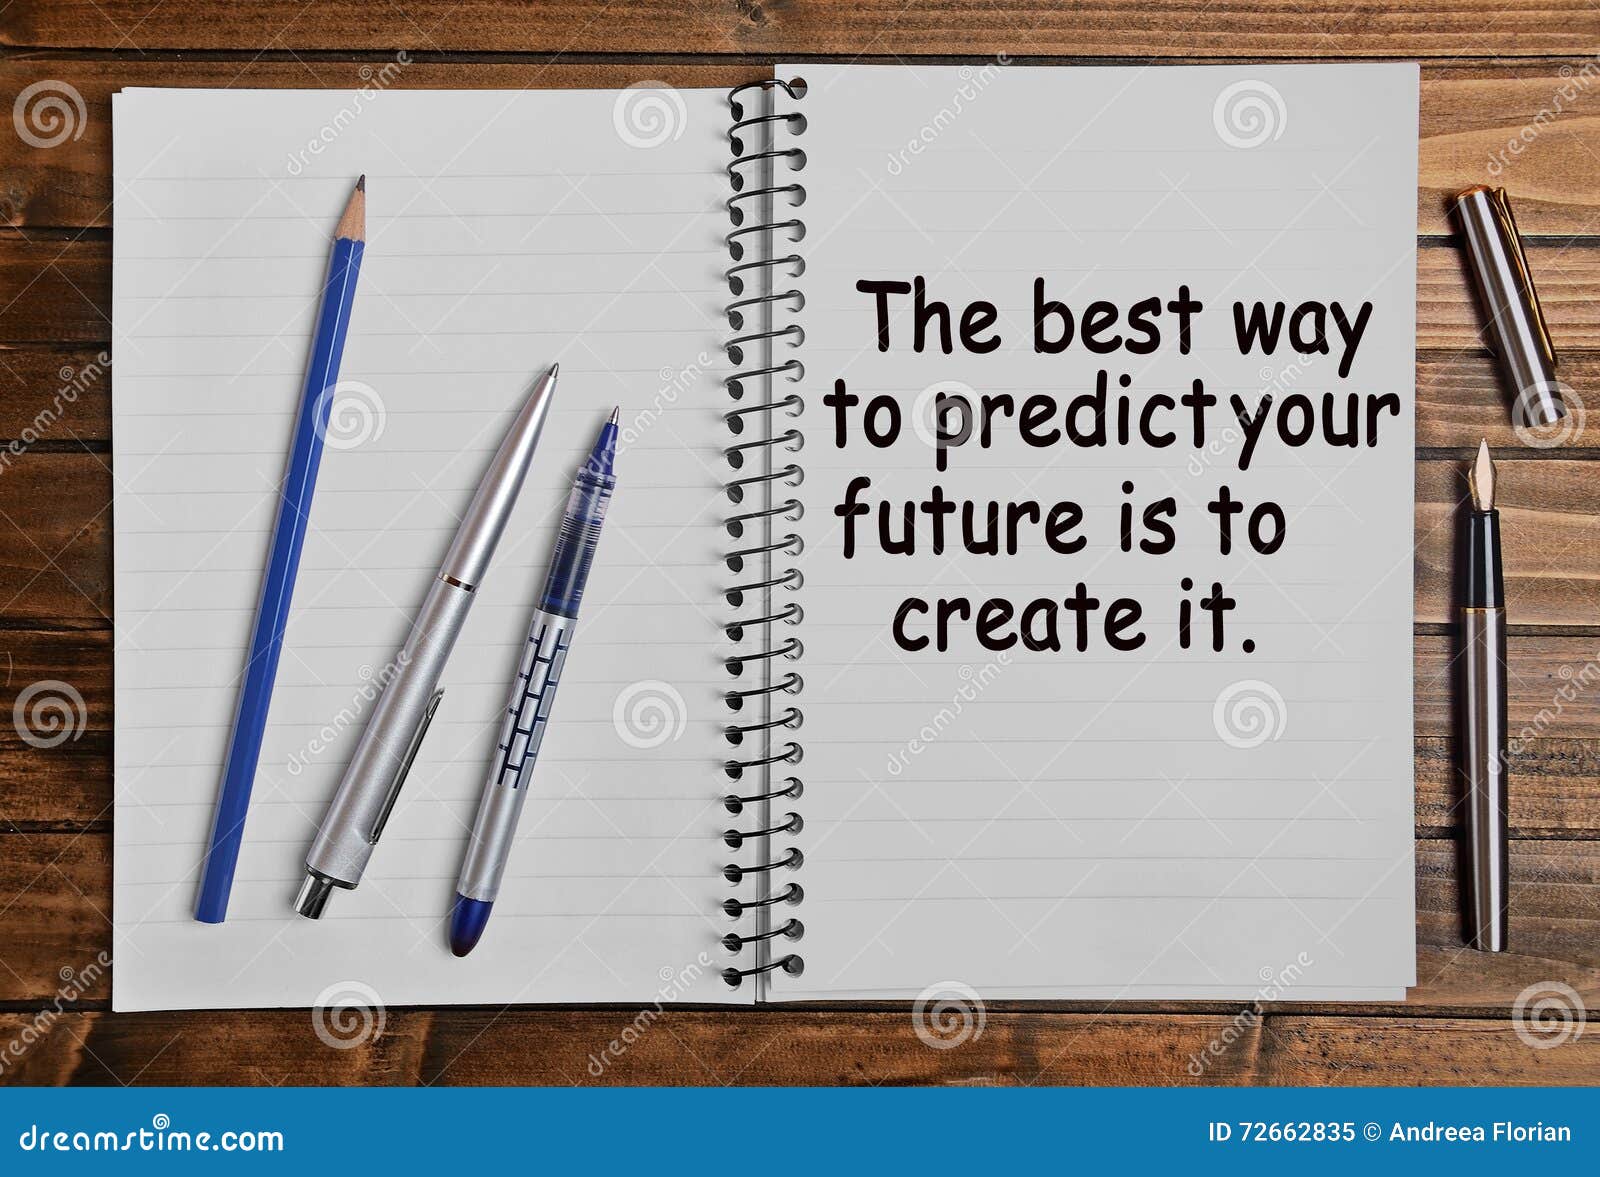 the best way to predict your future is to create it